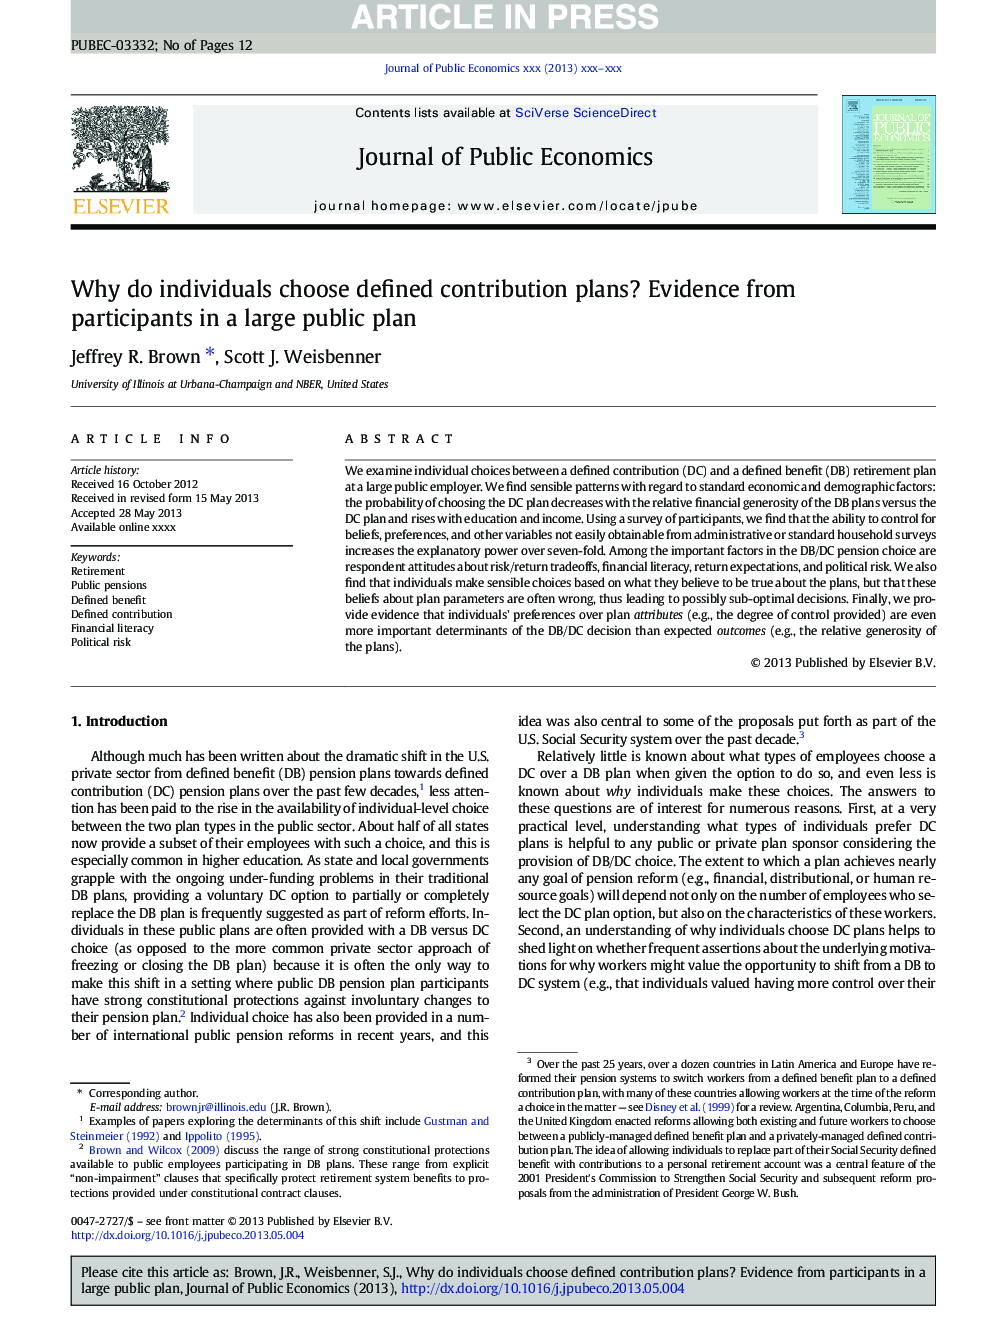 Why do individuals choose defined contribution plans? Evidence from participants in a large public plan